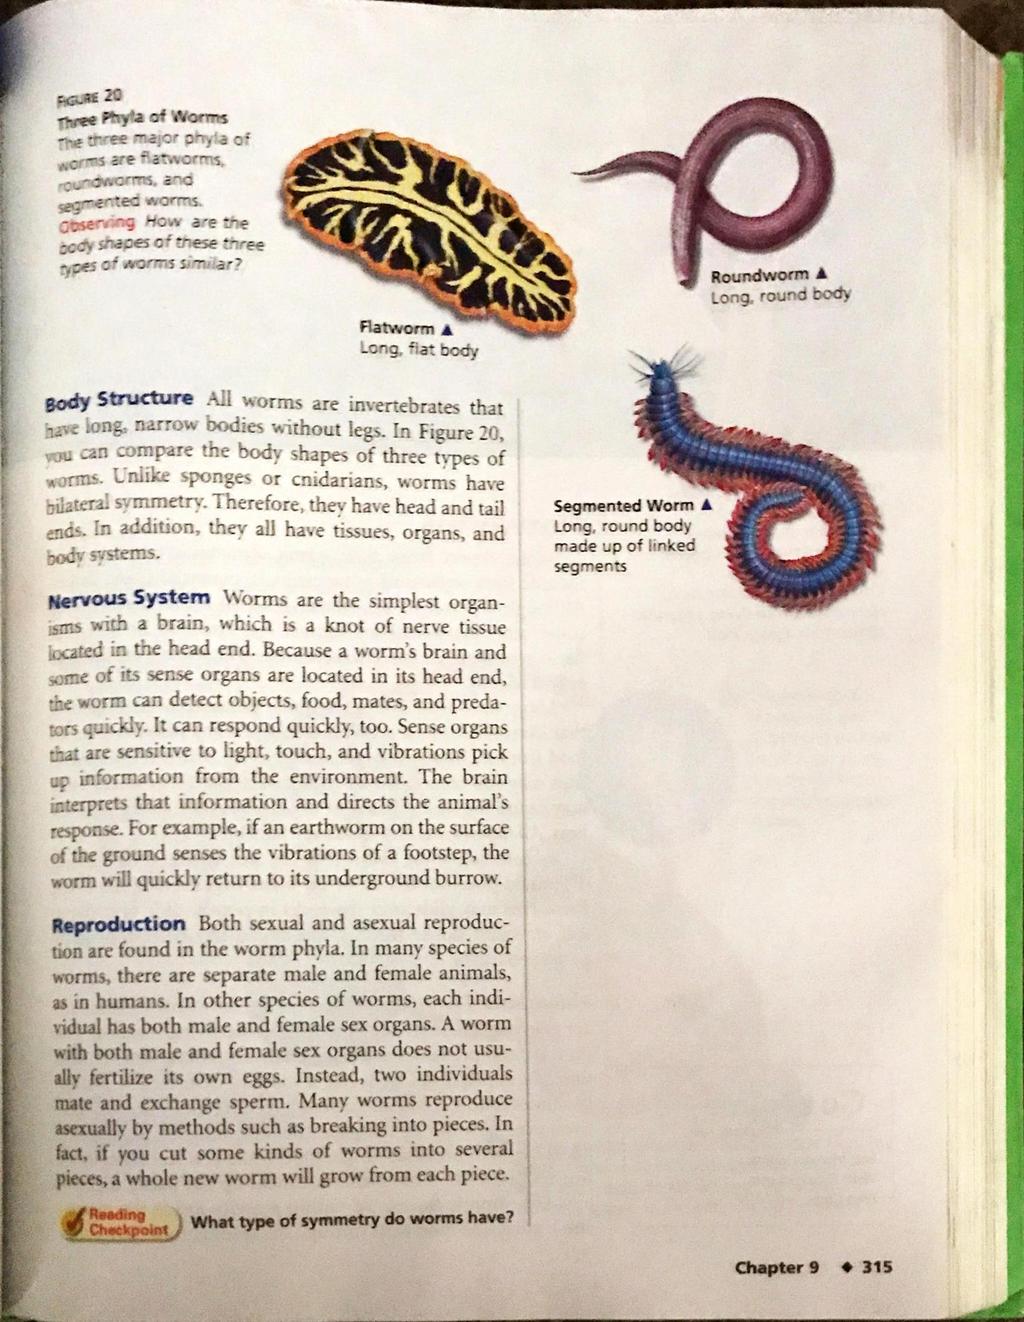 20 *yea of Worms three mar.' physa of acrns ate flatworms. rout worms. and g;rented worms. gaset-ging How are the eco shapes cf tnese three types of worms similar?